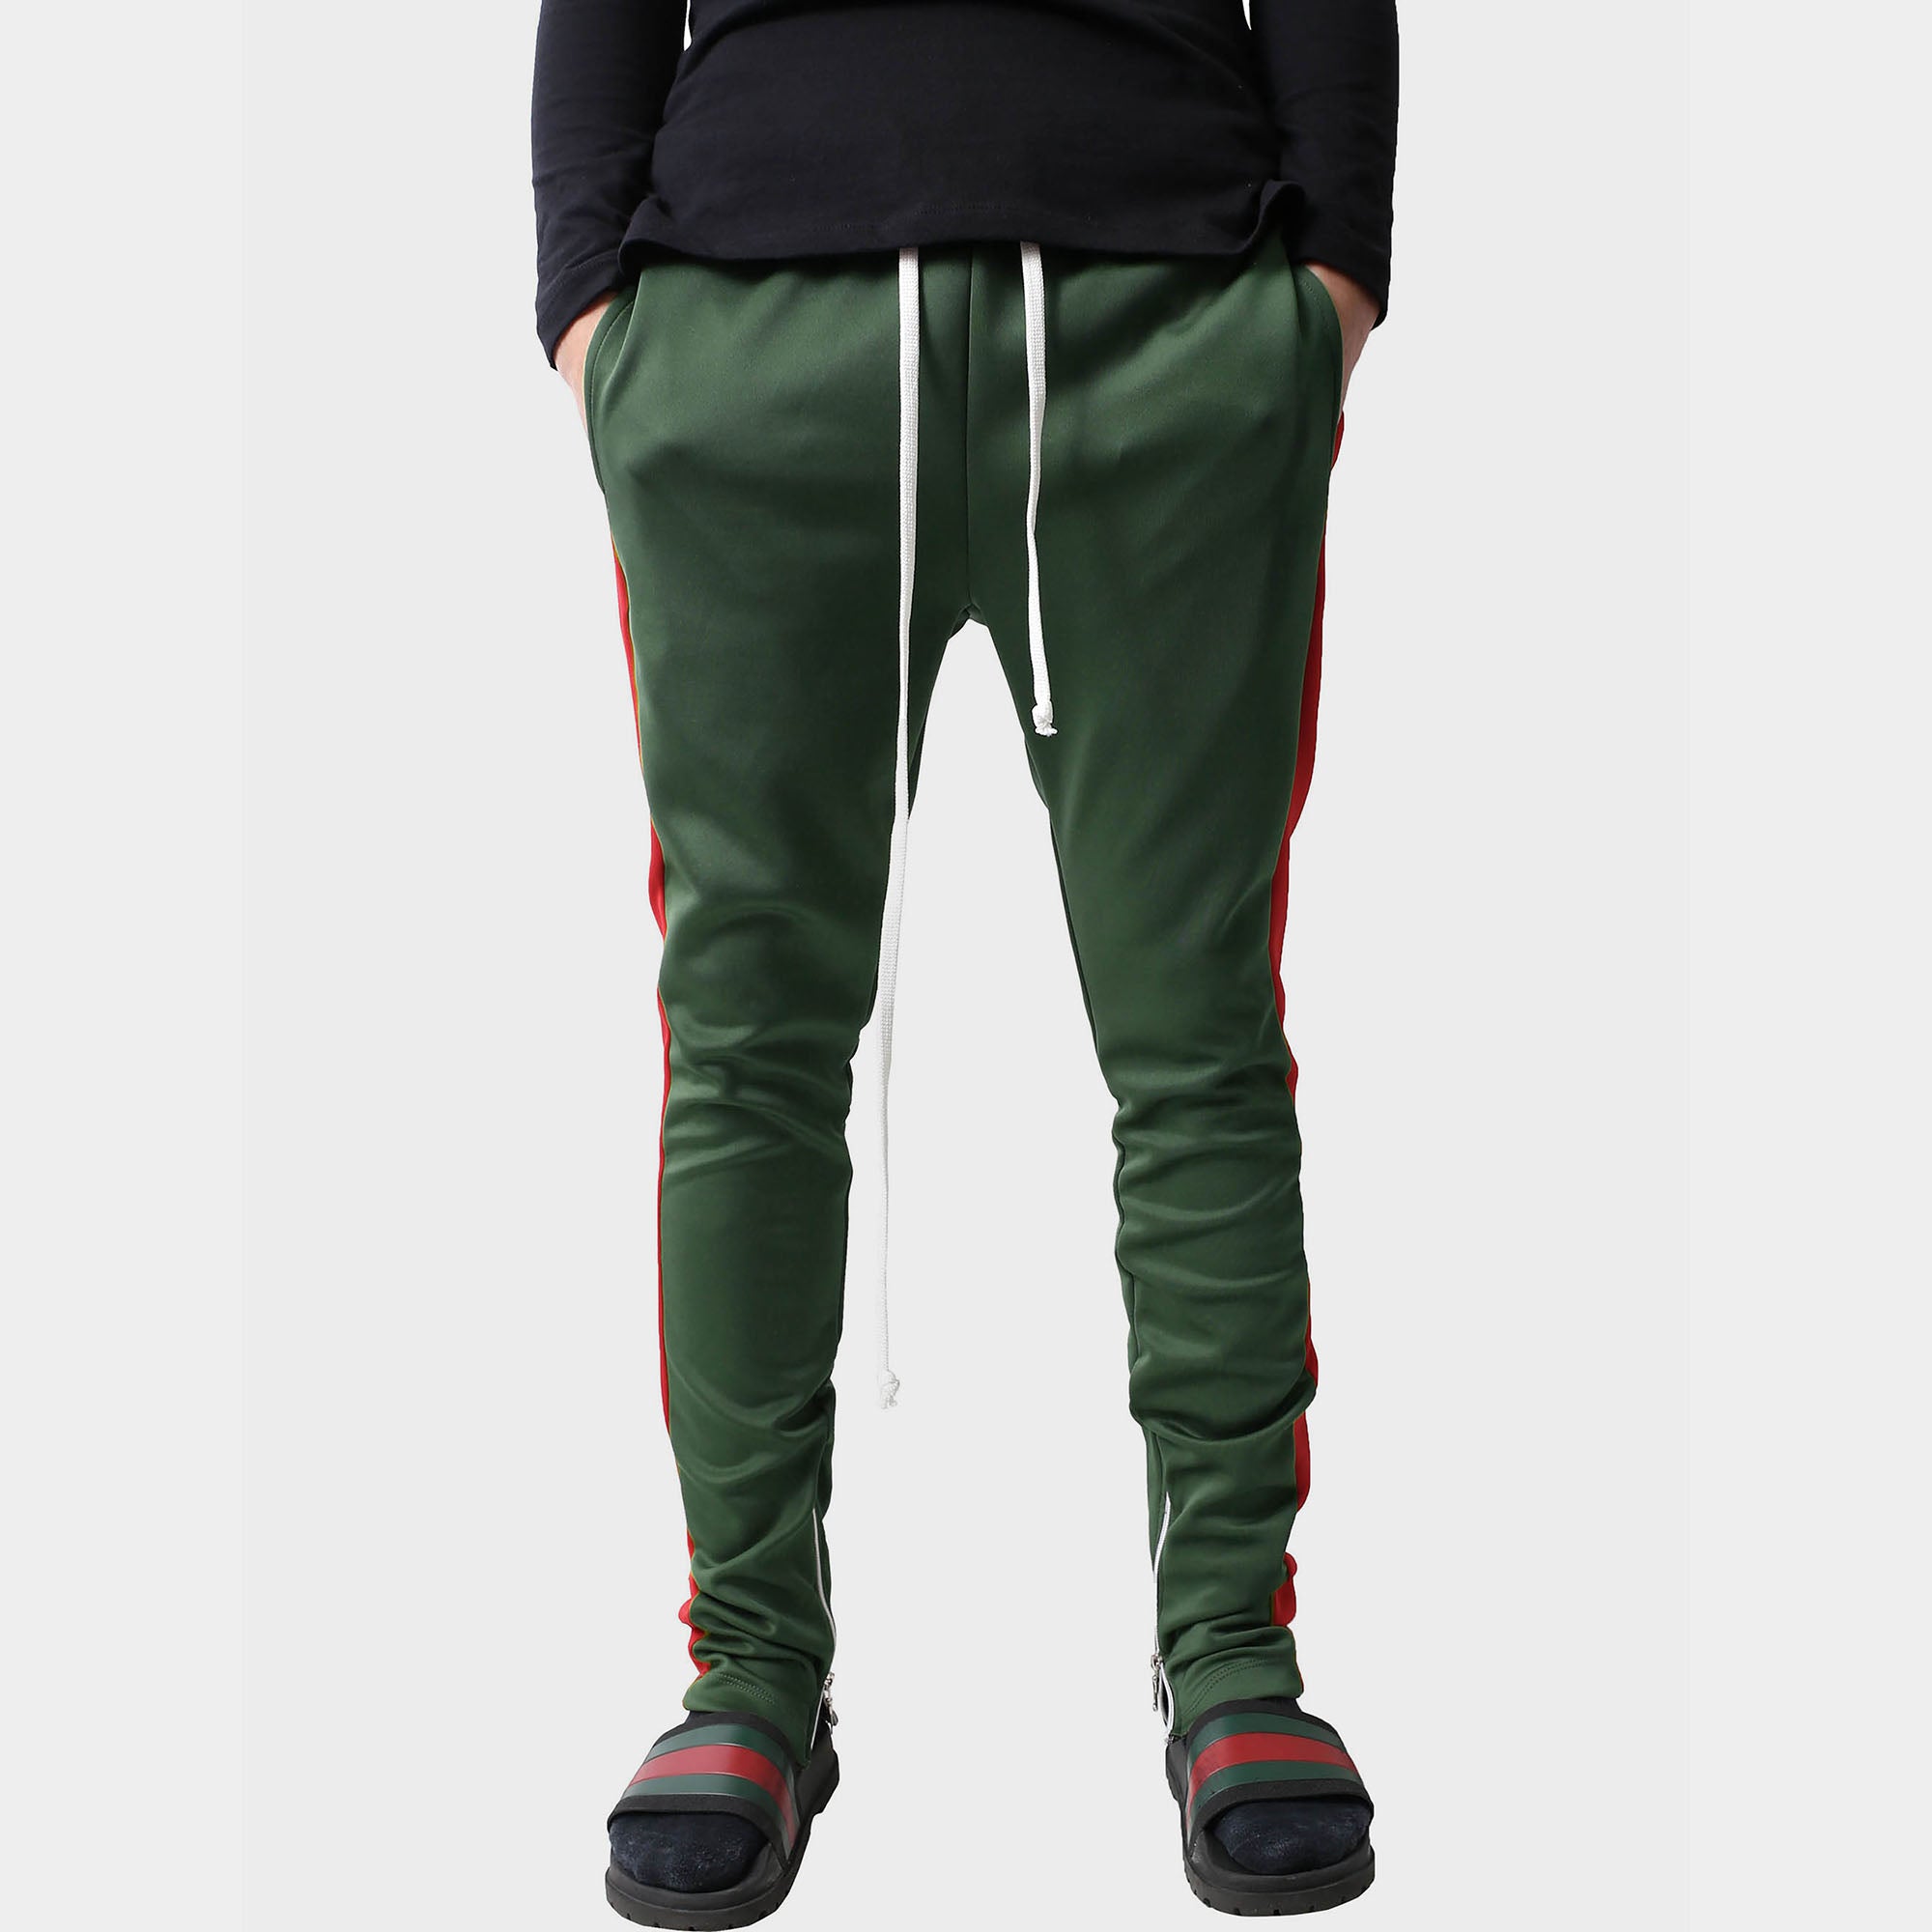 jogger_striped joggers_striped sweatpants_velvet joggers mens_sweatpants_side stripe joggers mens_champion sweatpants_champion joggers_mens joggers_Hunter Green/Red